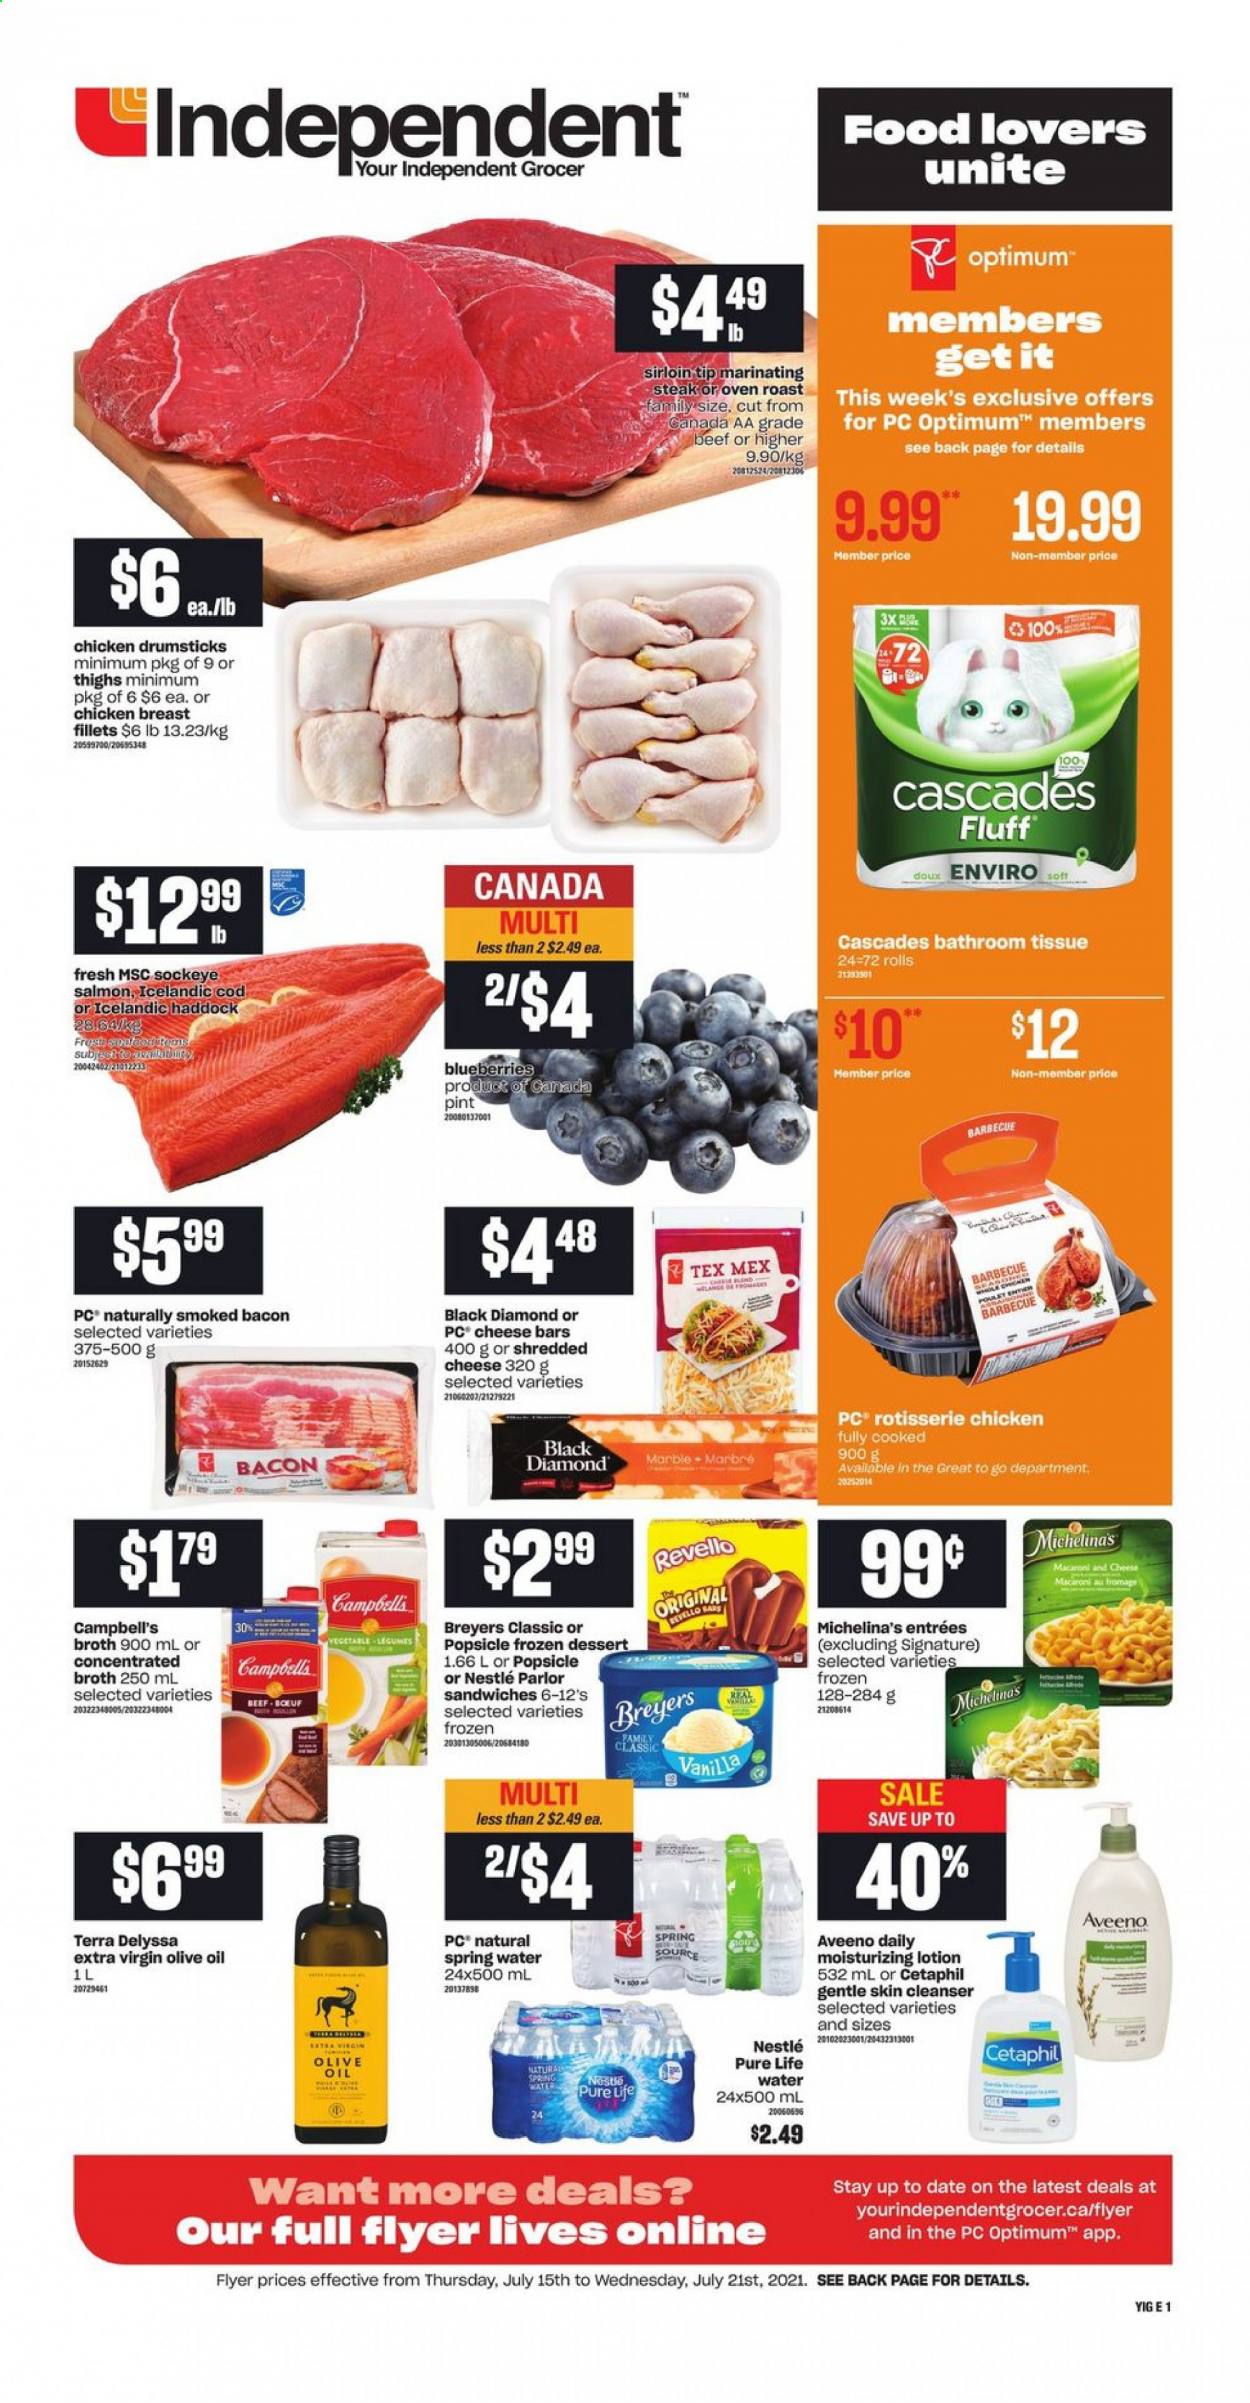 thumbnail - Independent Flyer - July 15, 2021 - July 21, 2021 - Sales products - blueberries, cod, salmon, haddock, Campbell's, macaroni & cheese, chicken roast, sandwich, bacon, shredded cheese, broth, extra virgin olive oil, olive oil, oil, spring water, Pure Life Water, chicken breasts, chicken drumsticks, chicken, Aveeno, bath tissue, cleanser, body lotion, Optimum, Nestlé, steak. Page 1.